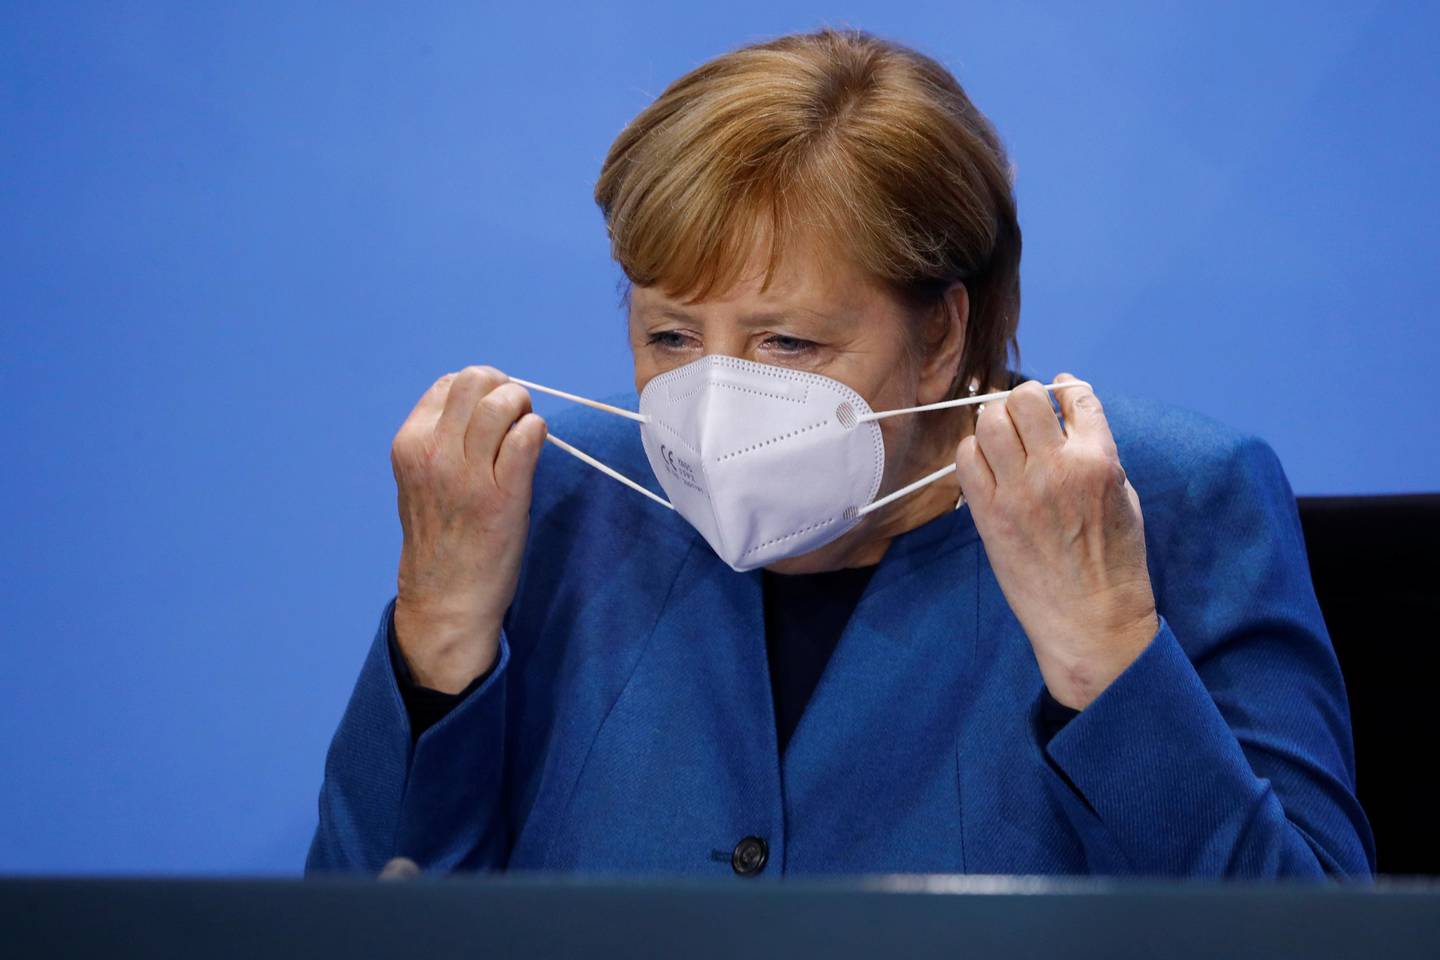 German Chancellor Angela Merkel (CDU) takes off her mask after a press conference at the Chancellery in Berlin, Wednesday, Oct. 28, 2020. Merkel is pressing for a partial lockdown as the number of newly recorded infections in the country hit another record high Wednesday. (Fabrizio Bensch/pool photo via AP)